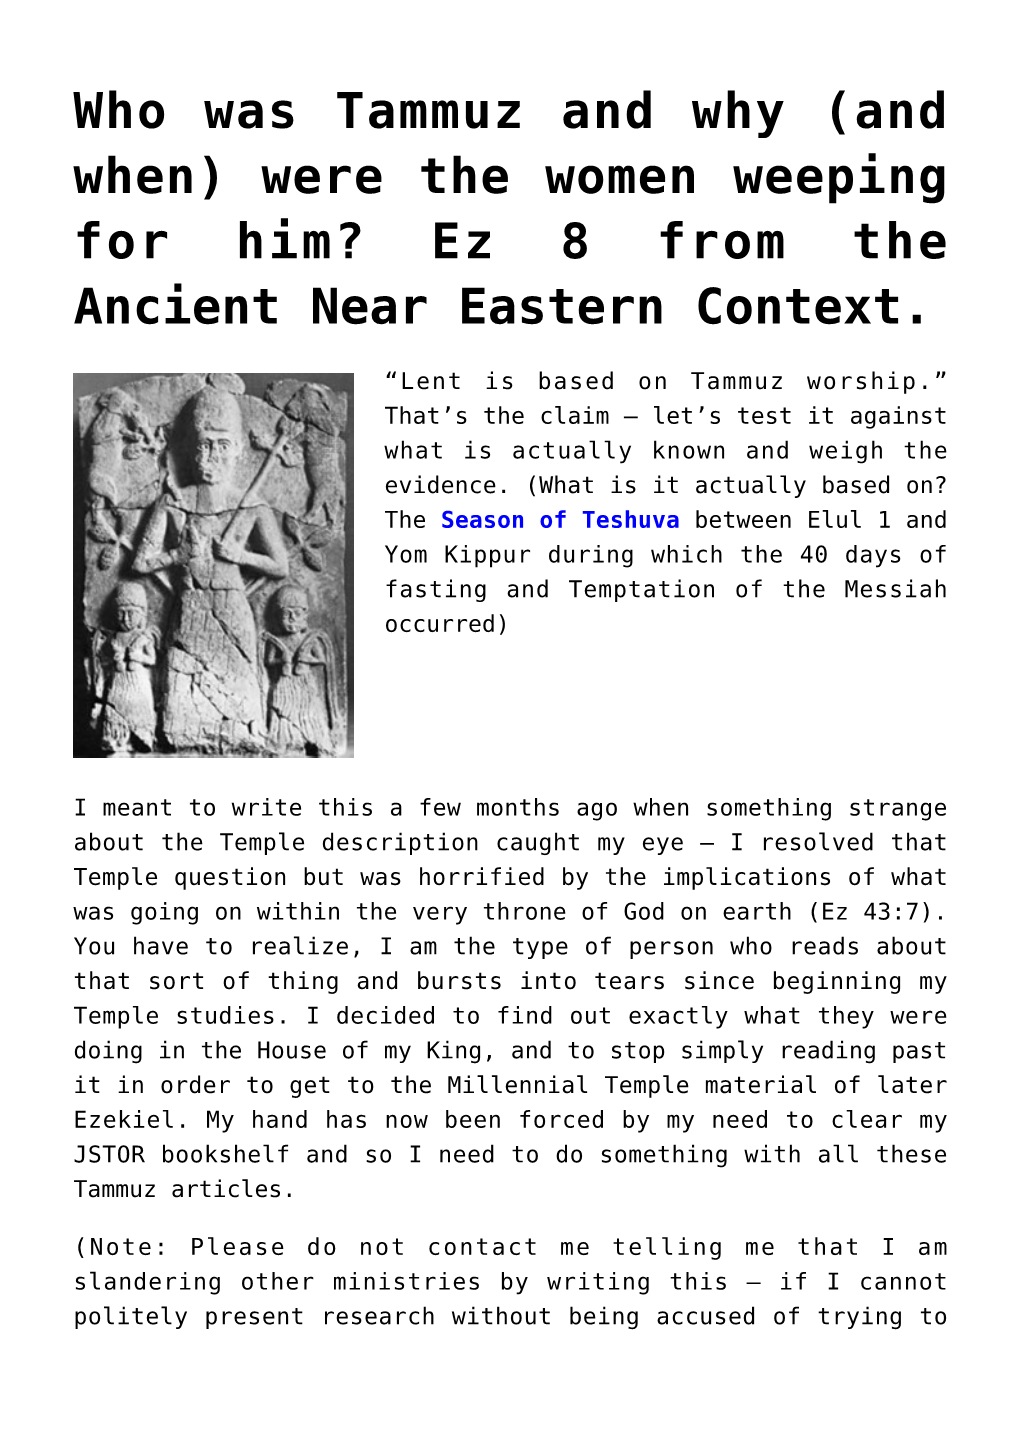 Were the Women Weeping for Him? Ez 8 from the Ancient Near Eastern Context